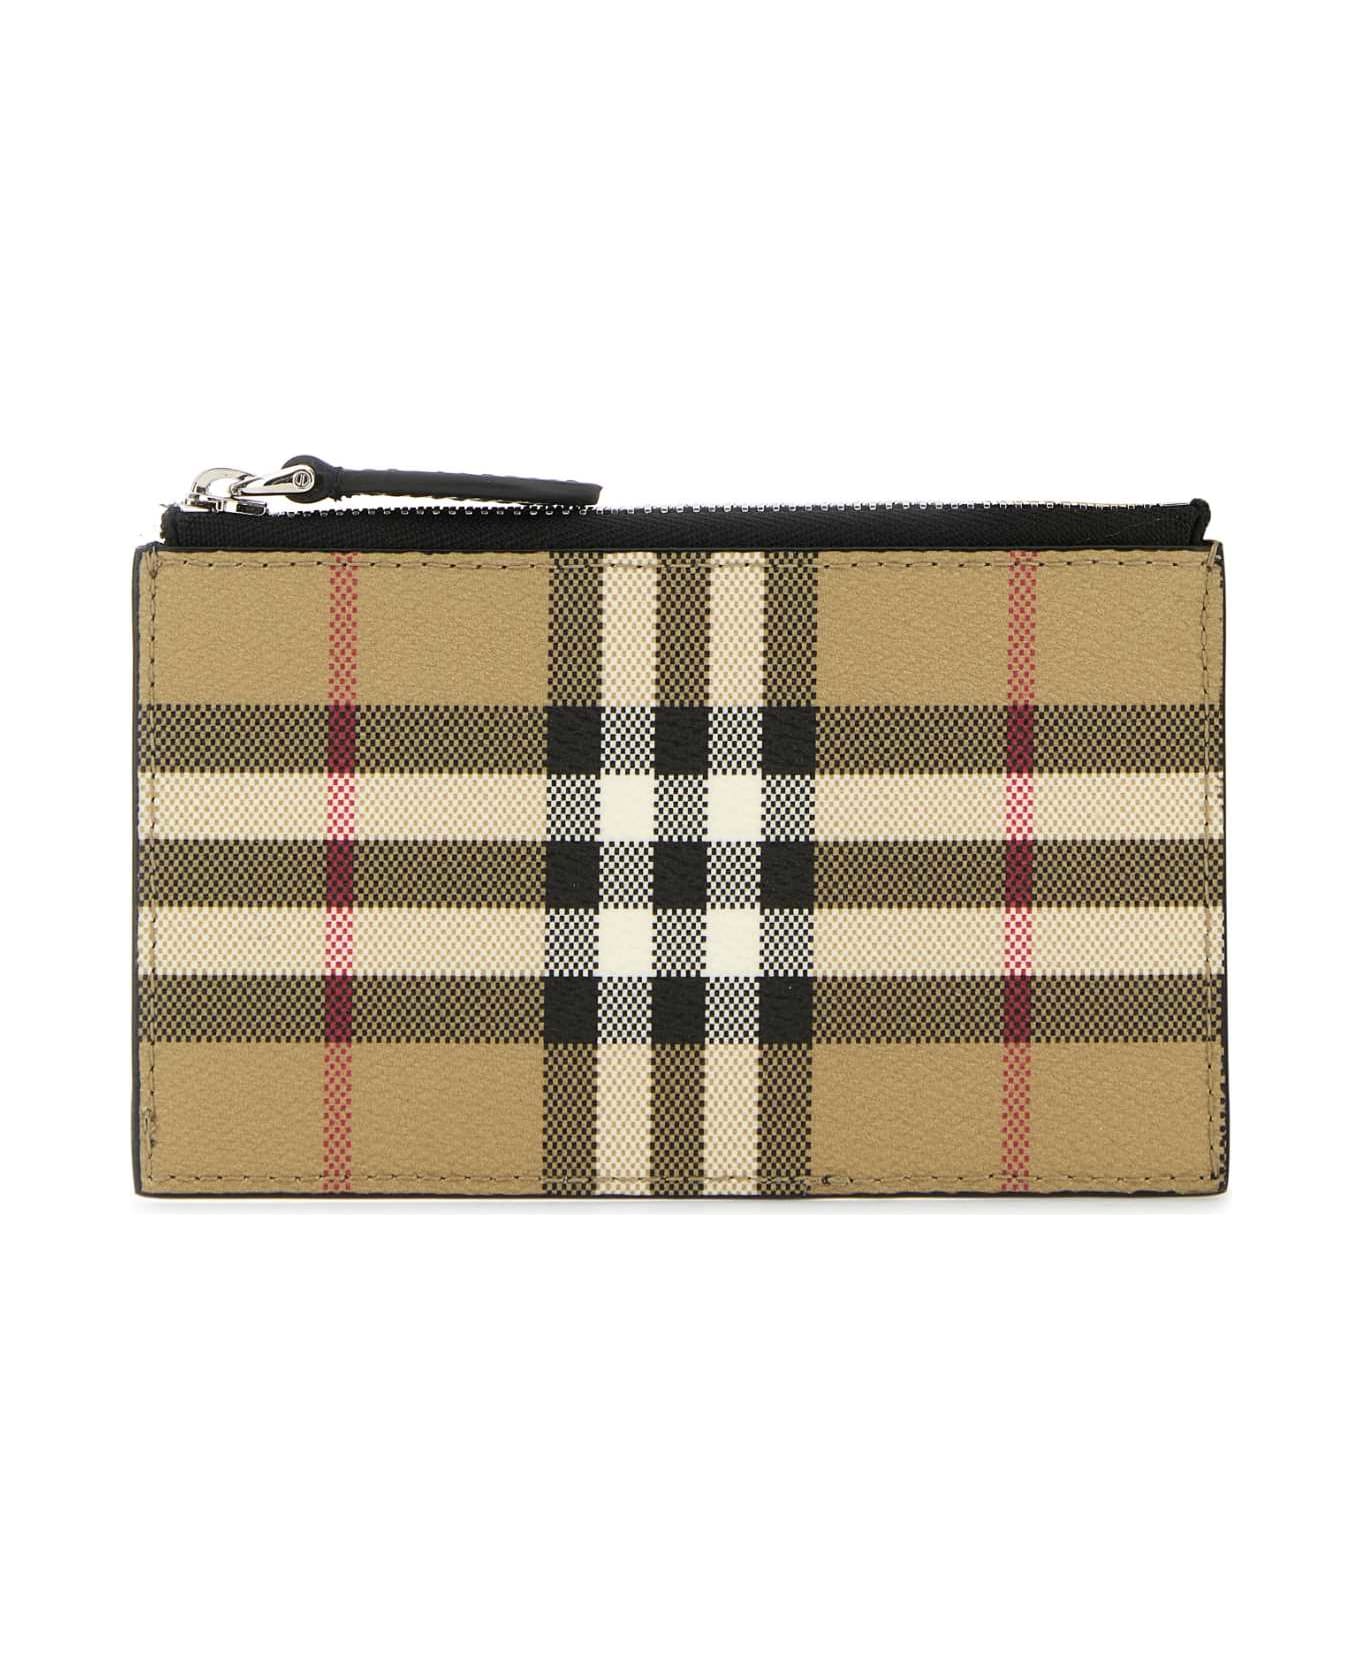 Burberry Printed Canvas Card Holder - ARCHIVEBEIGE